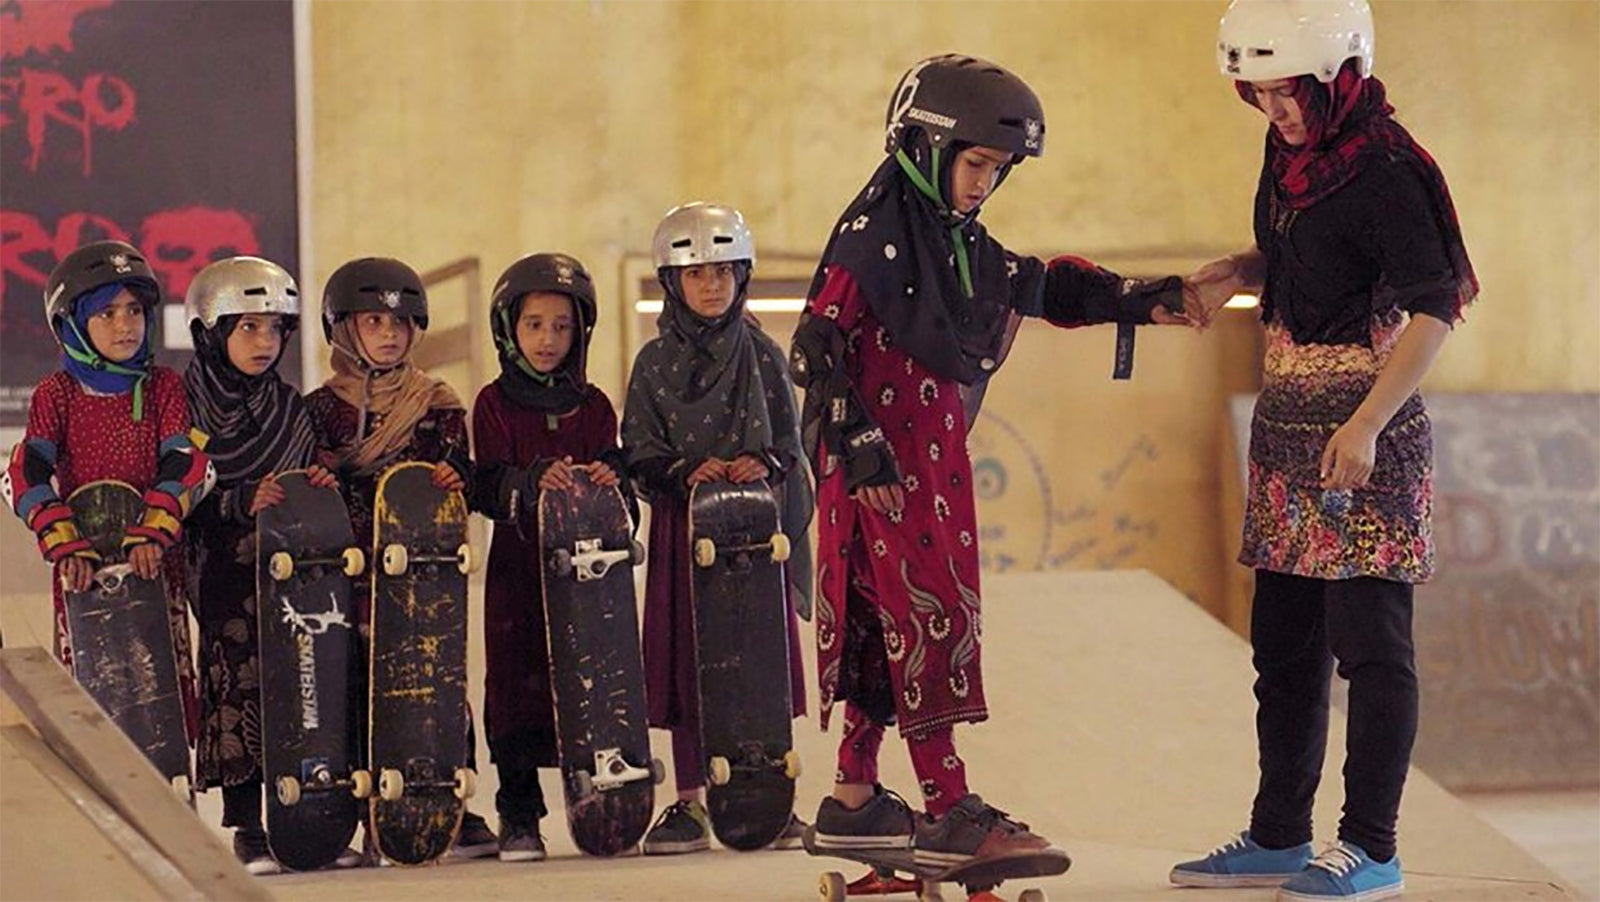 Skateboard in a Warzone (If You’re a Girl) Movie